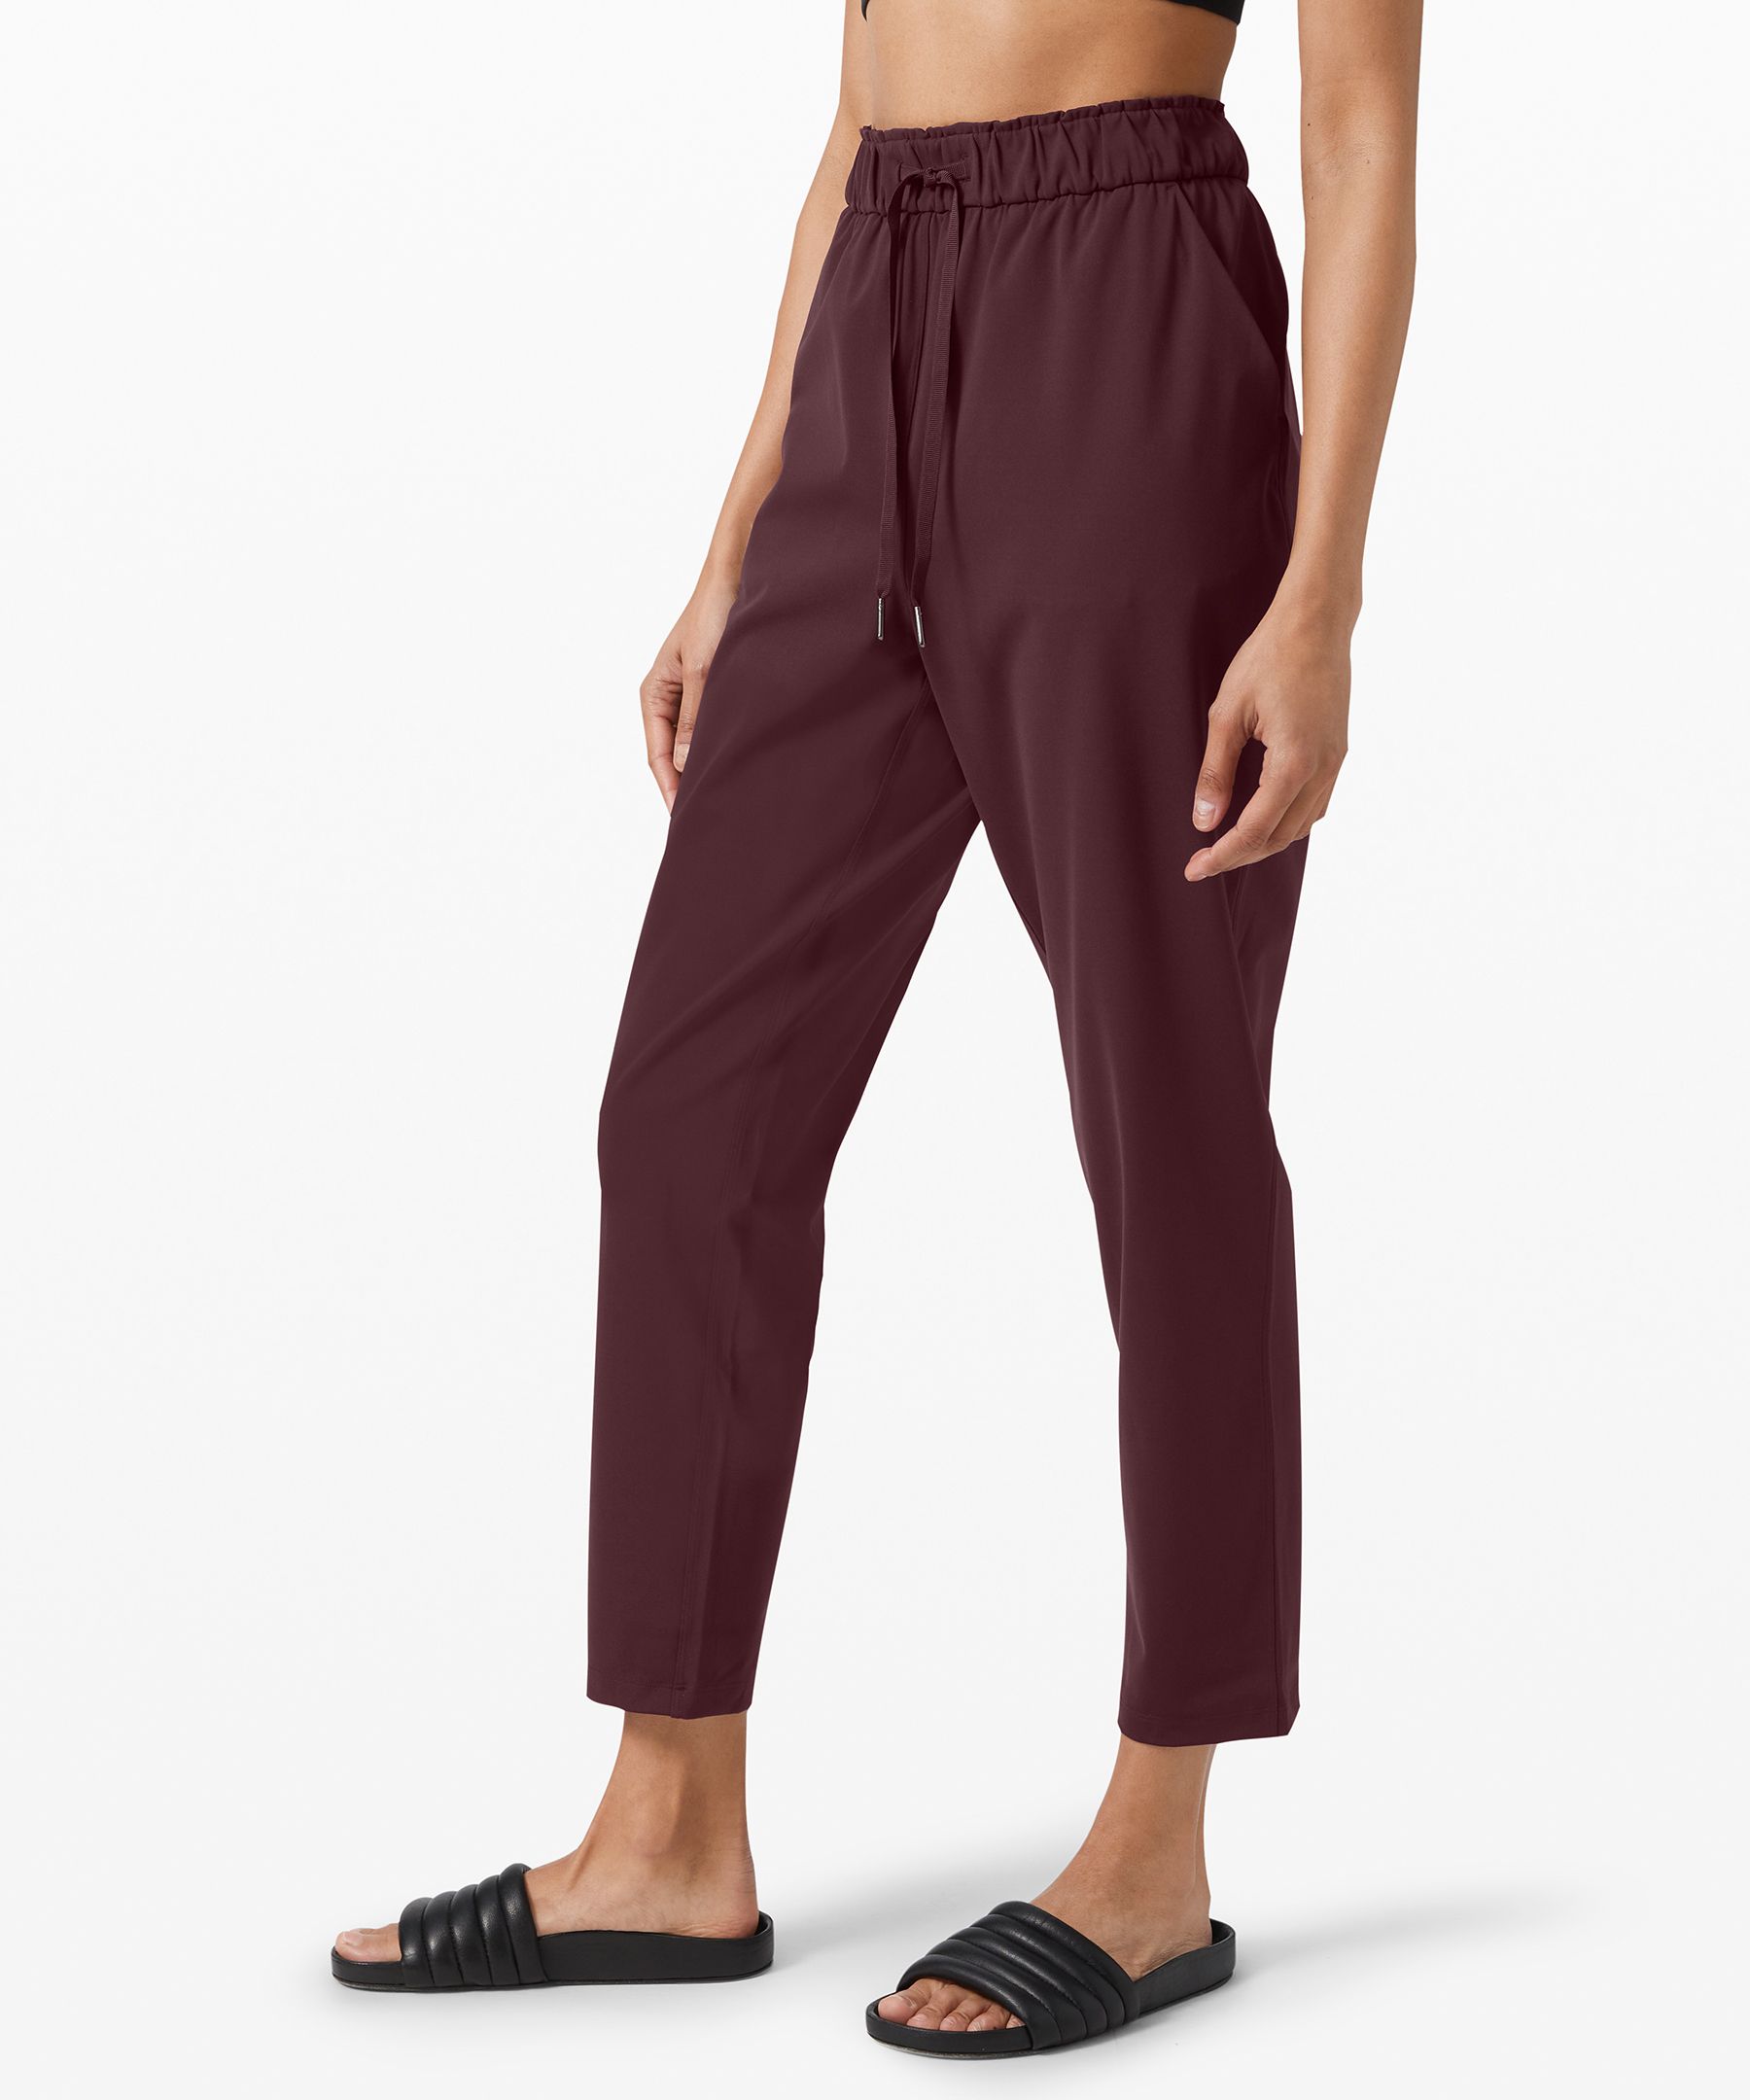 Lululemon Stretch High-rise Pants 7/8 Length In Cassis